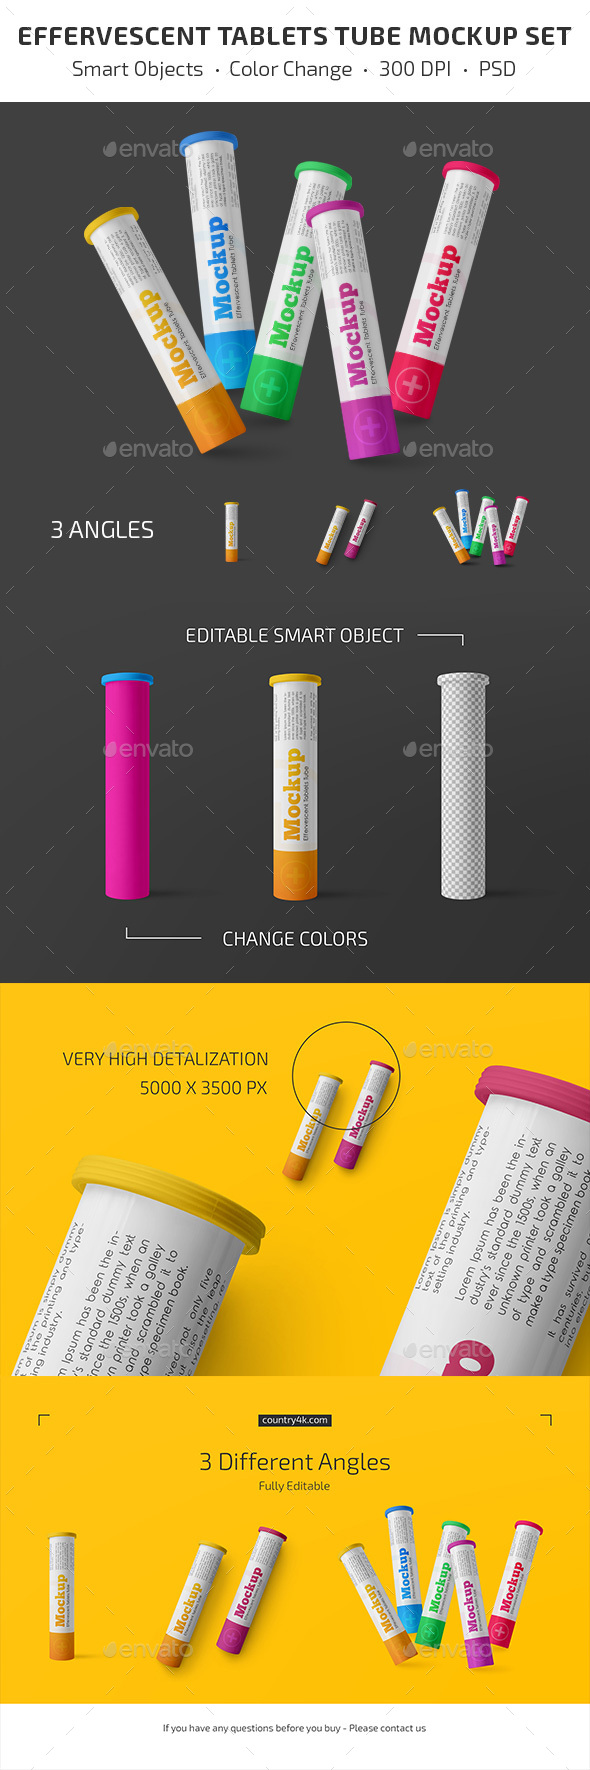 Download Glossy Plastic Effervescent Tablets Tube Mockup Front View High Angle Shot Mobile Phone Mockup 775258 Products